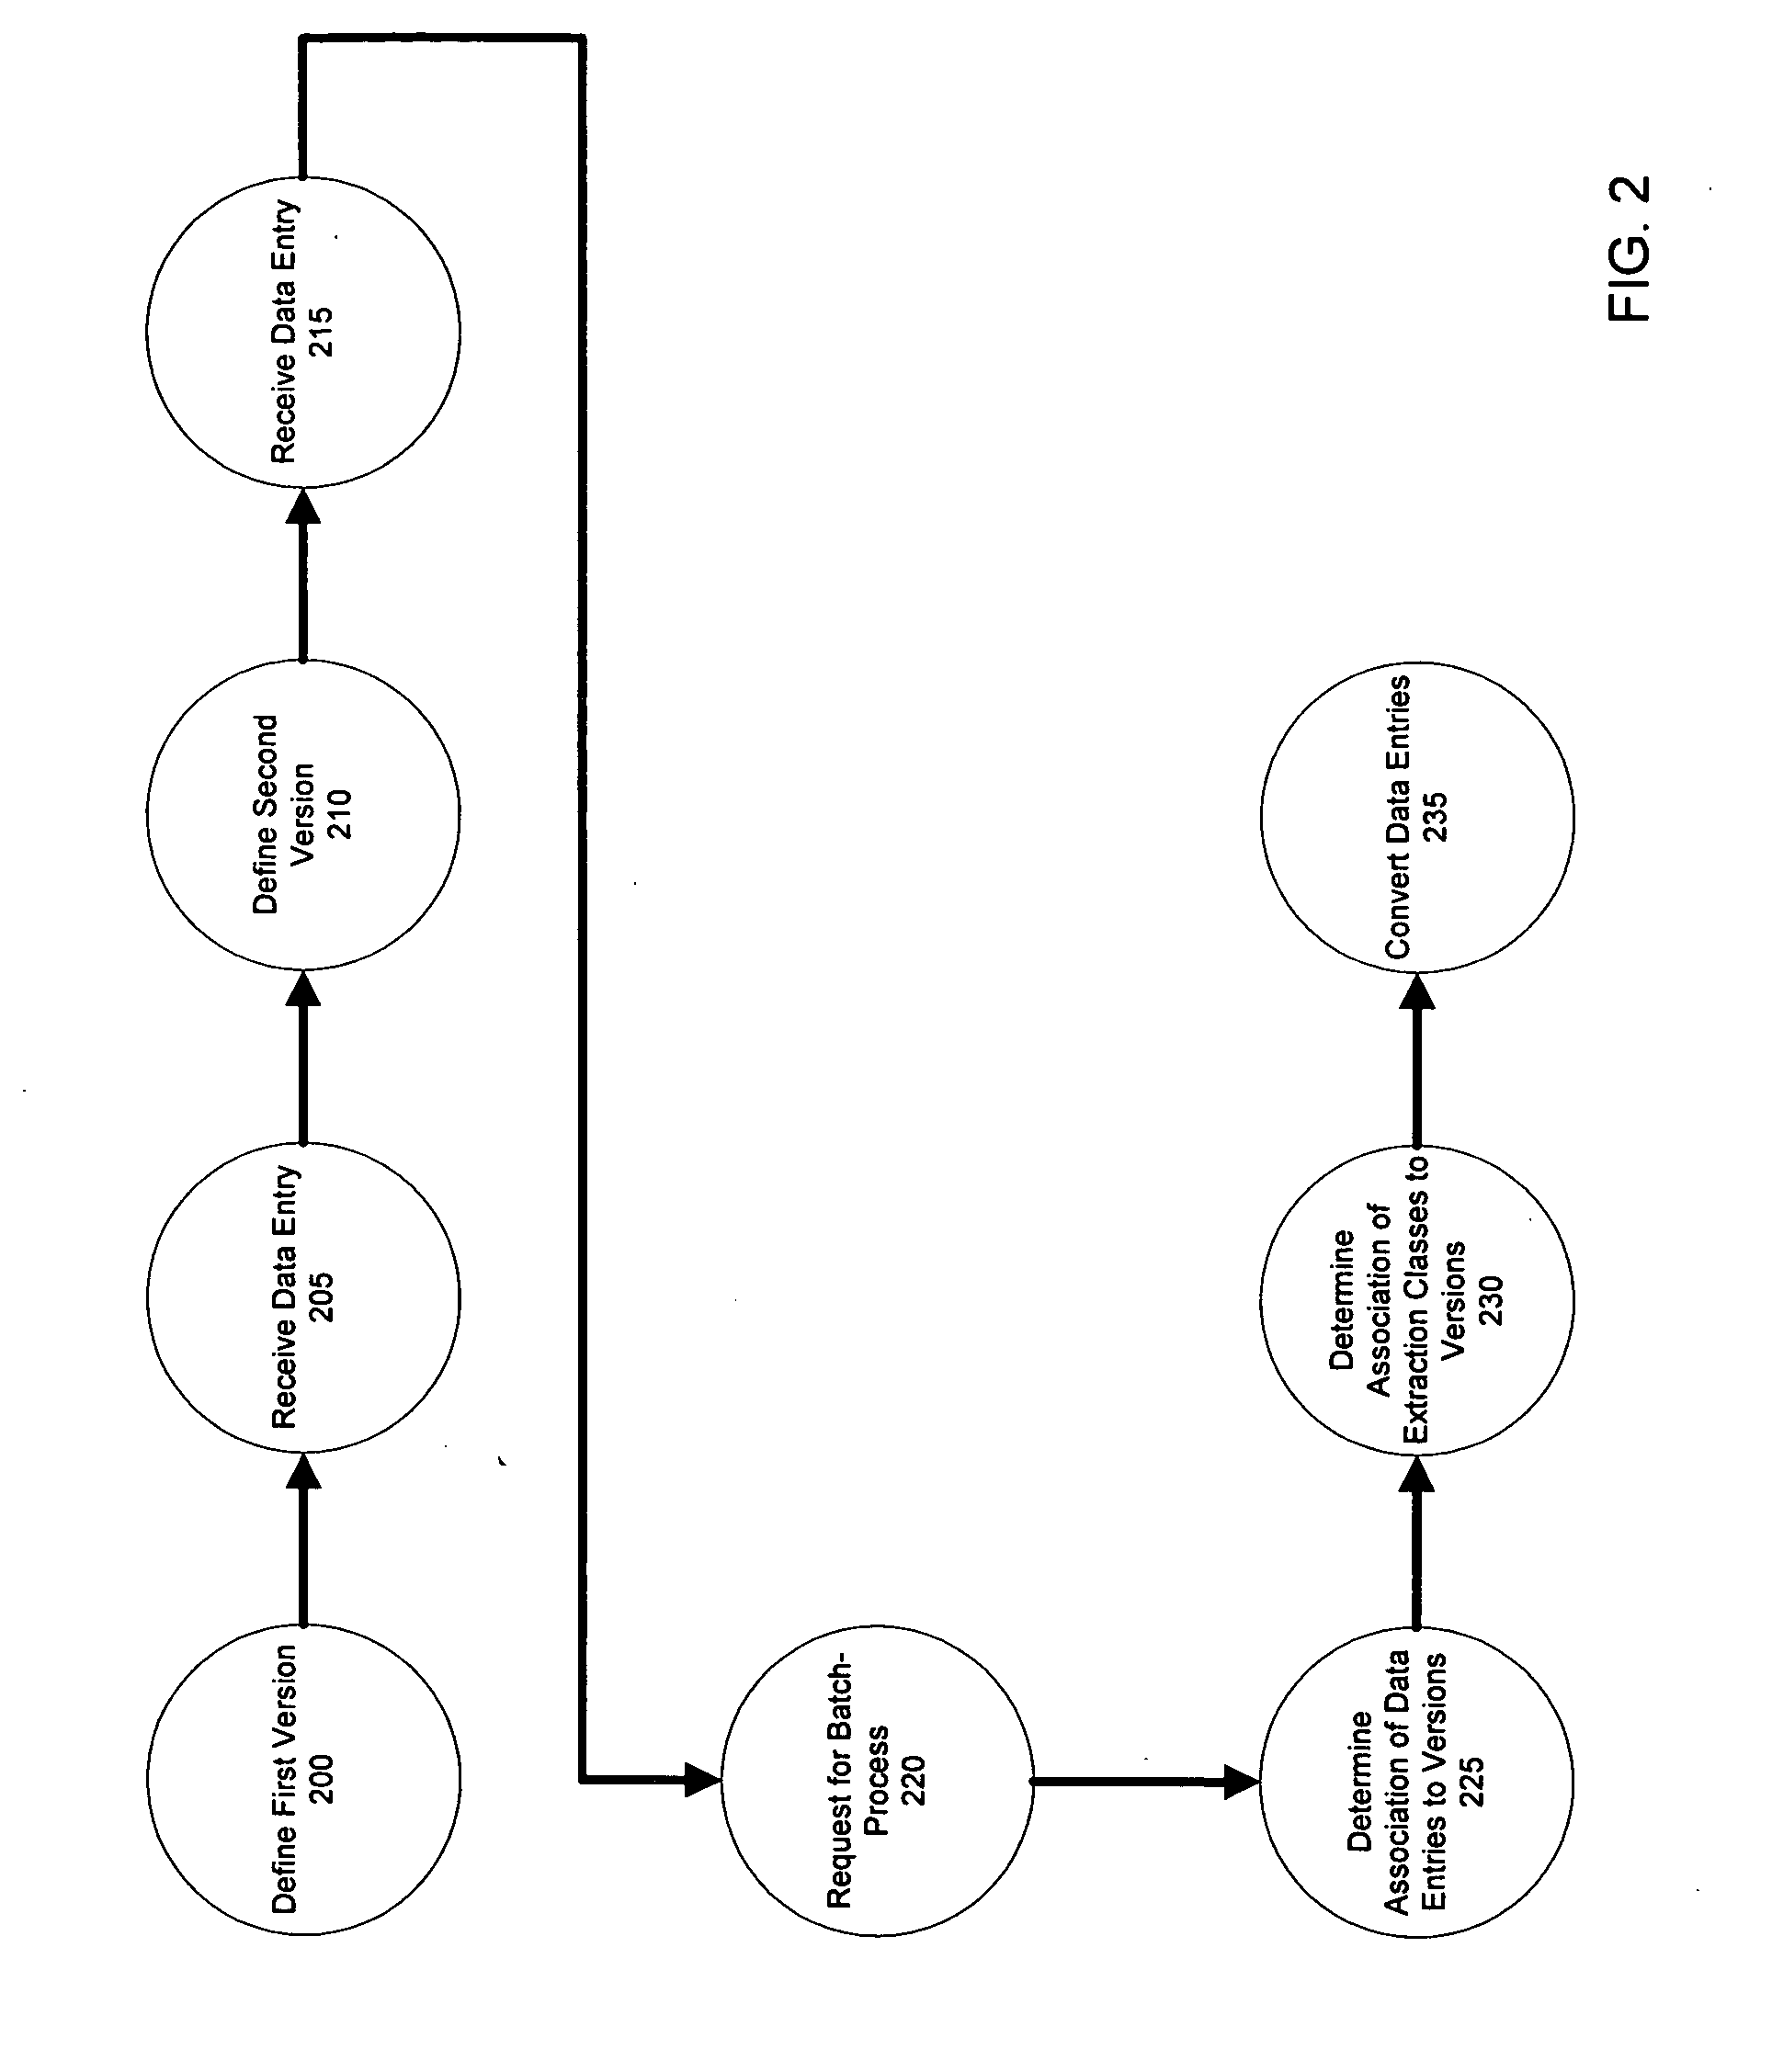 System and method for conversion of legacy language conforming data entries to industry-standard language conforming data entries